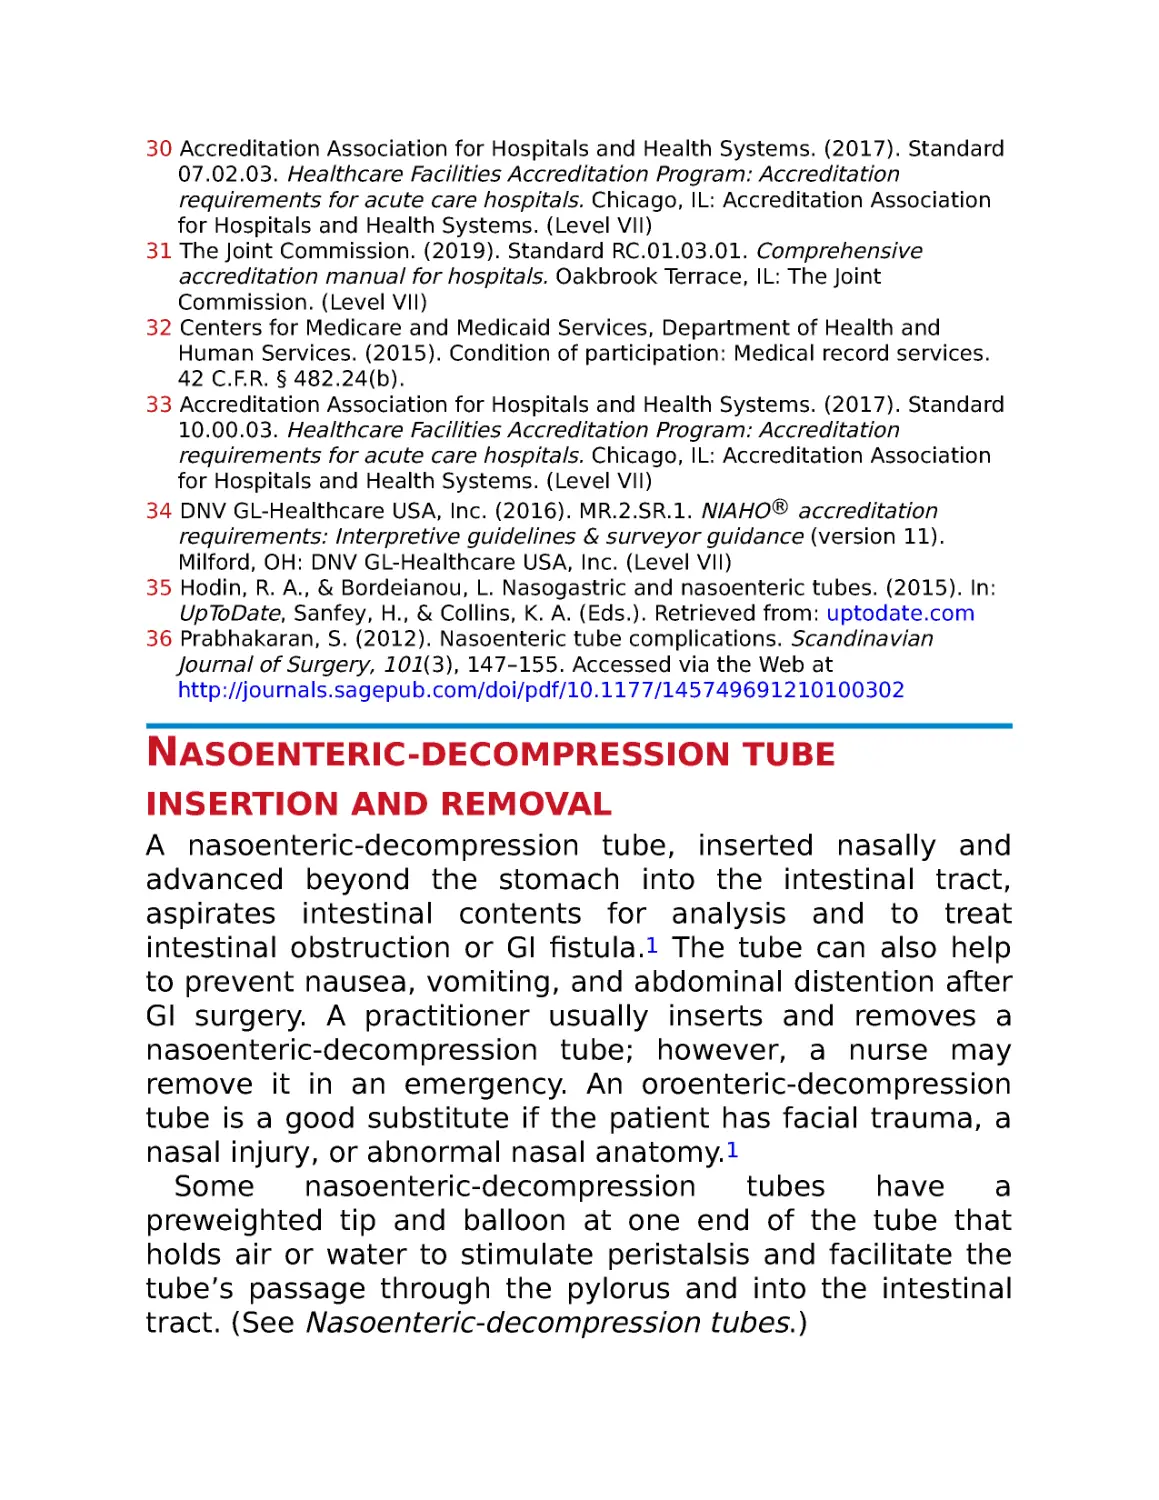 Nasoenteric-decompression tube insertion and removal